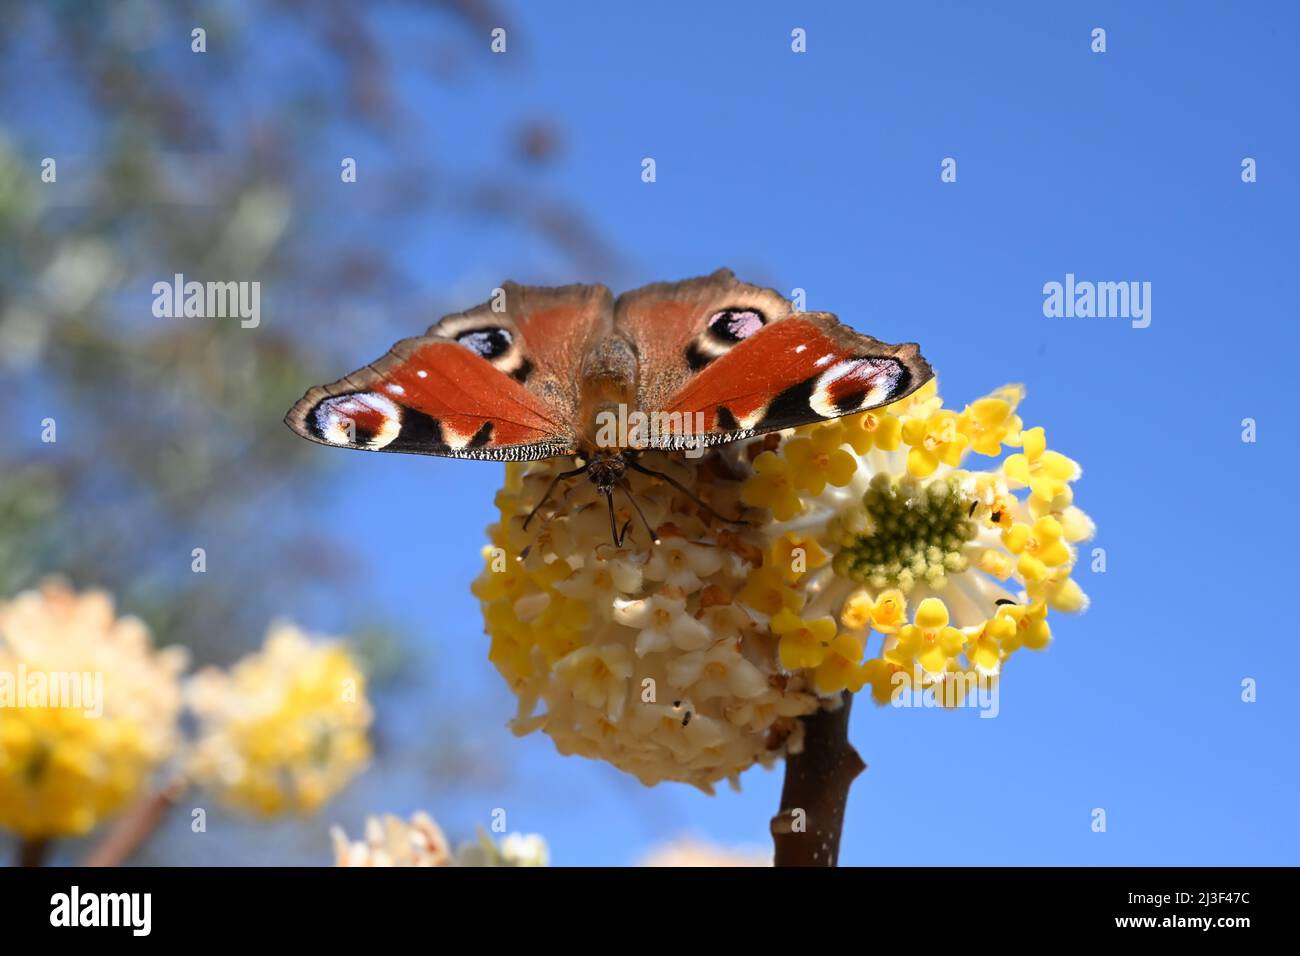 An English Peacock Butterfly, extract pollen from the yellow and white flowers of a Edgewothis chrysantha, Nanjing Gold, Paperbush, Thymelaeaceae, Stock Photo